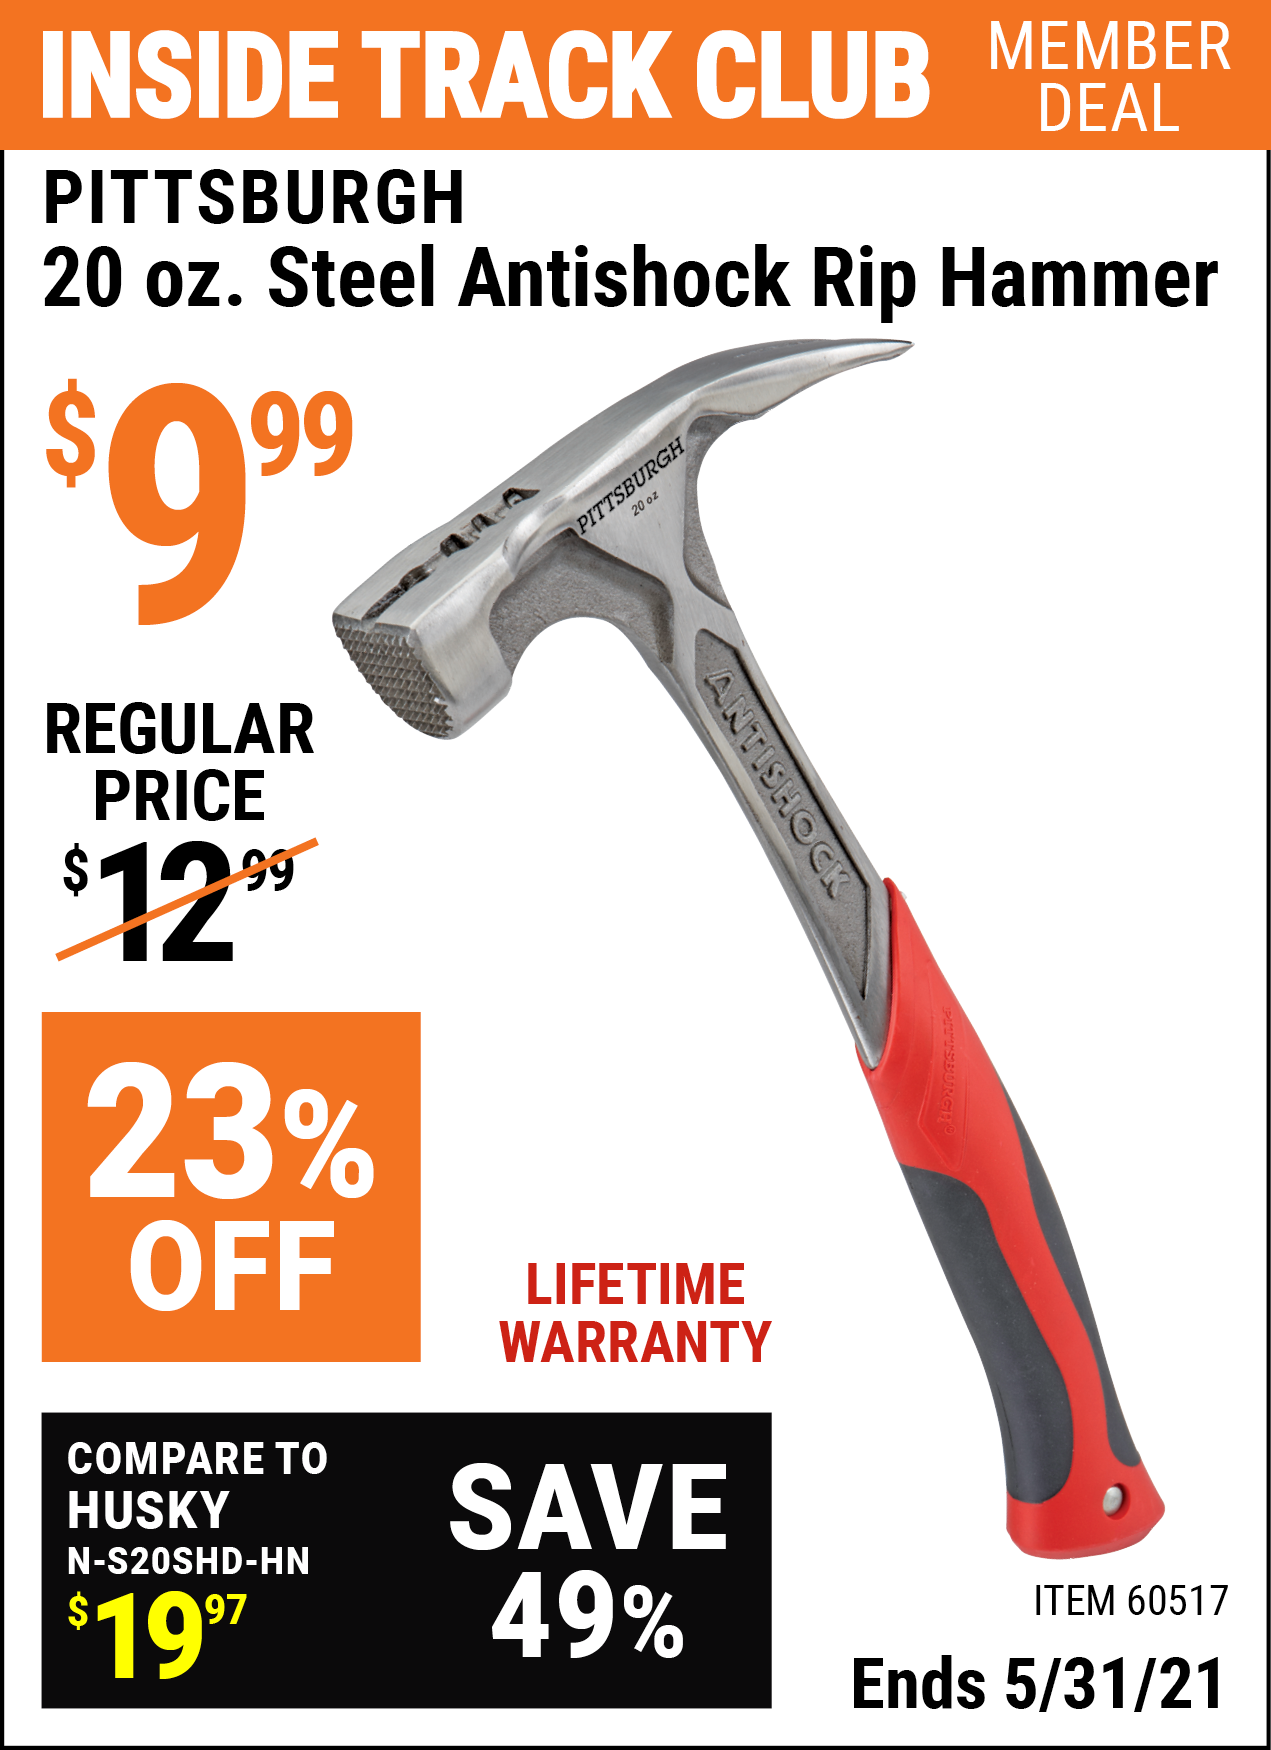 Inside Track Club members can buy the PITTSBURGH 20 oz. Steel Antishock Professional Rip Hammer (Item 60517) for $9.99, valid through 5/31/2021.